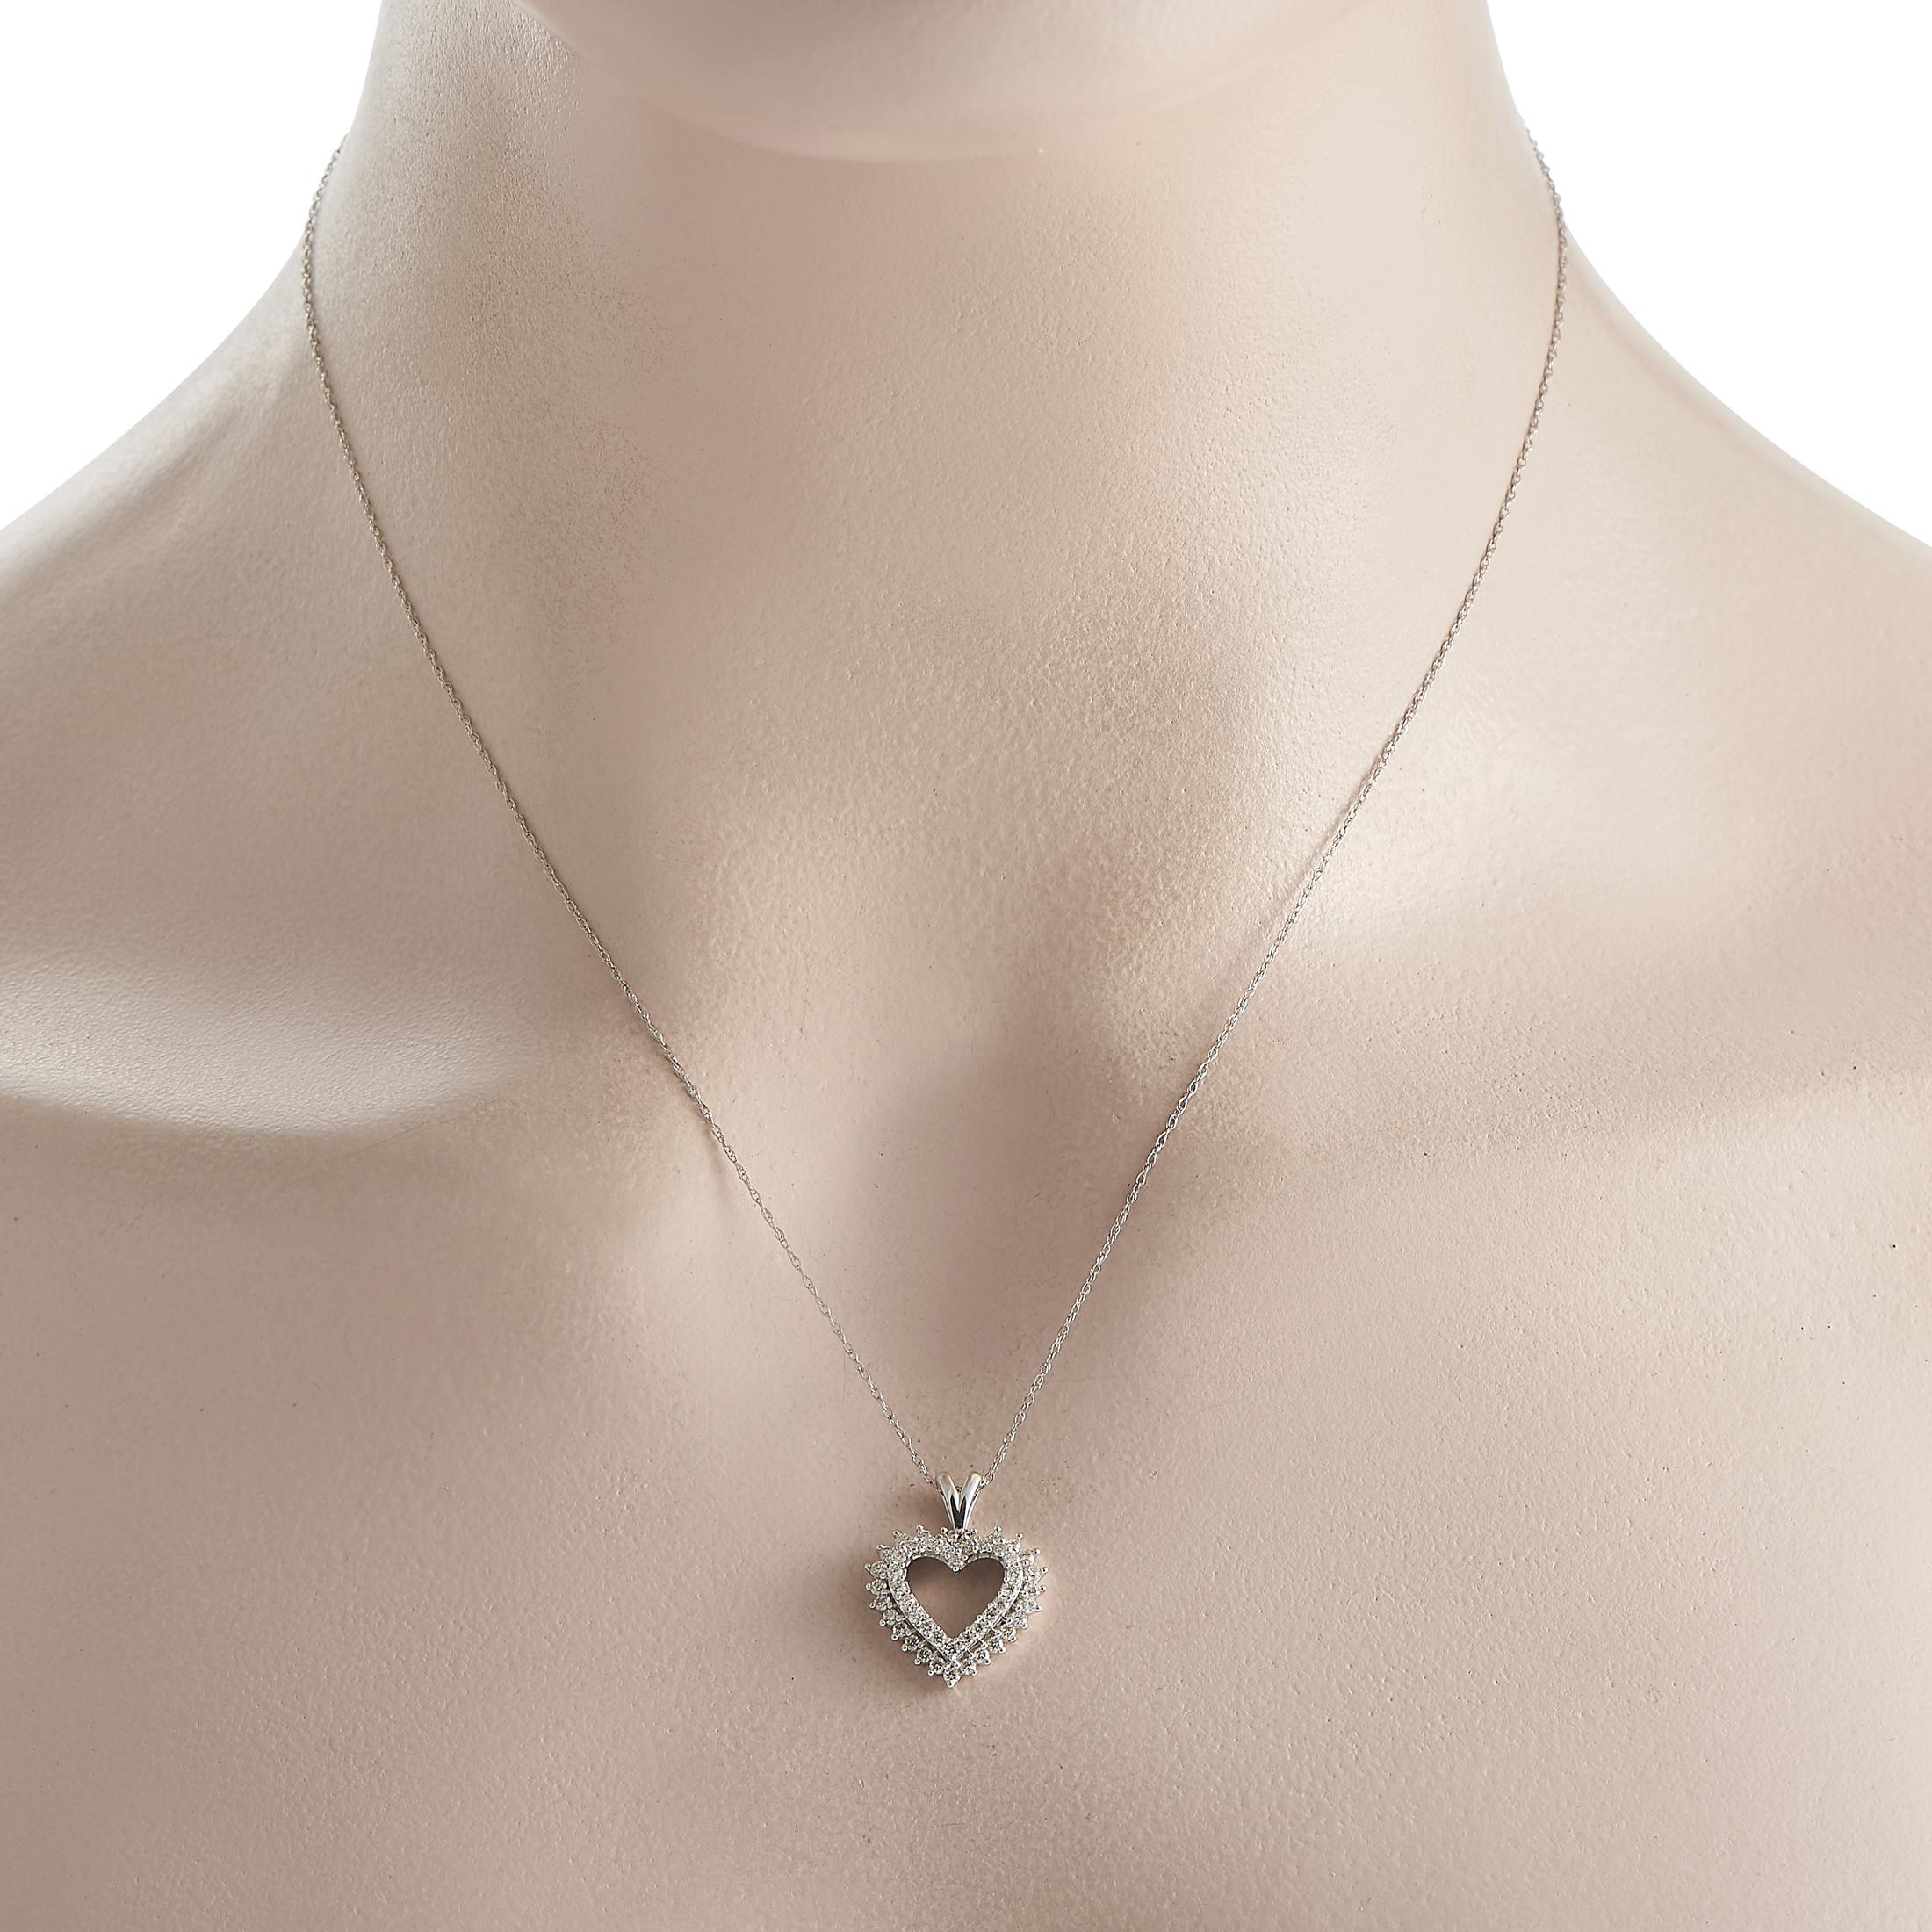 A dainty piece of jewelry that makes a lovely gift. This necklace features a 14K white gold heart-shaped pendant with an open silhouette. The 0.75